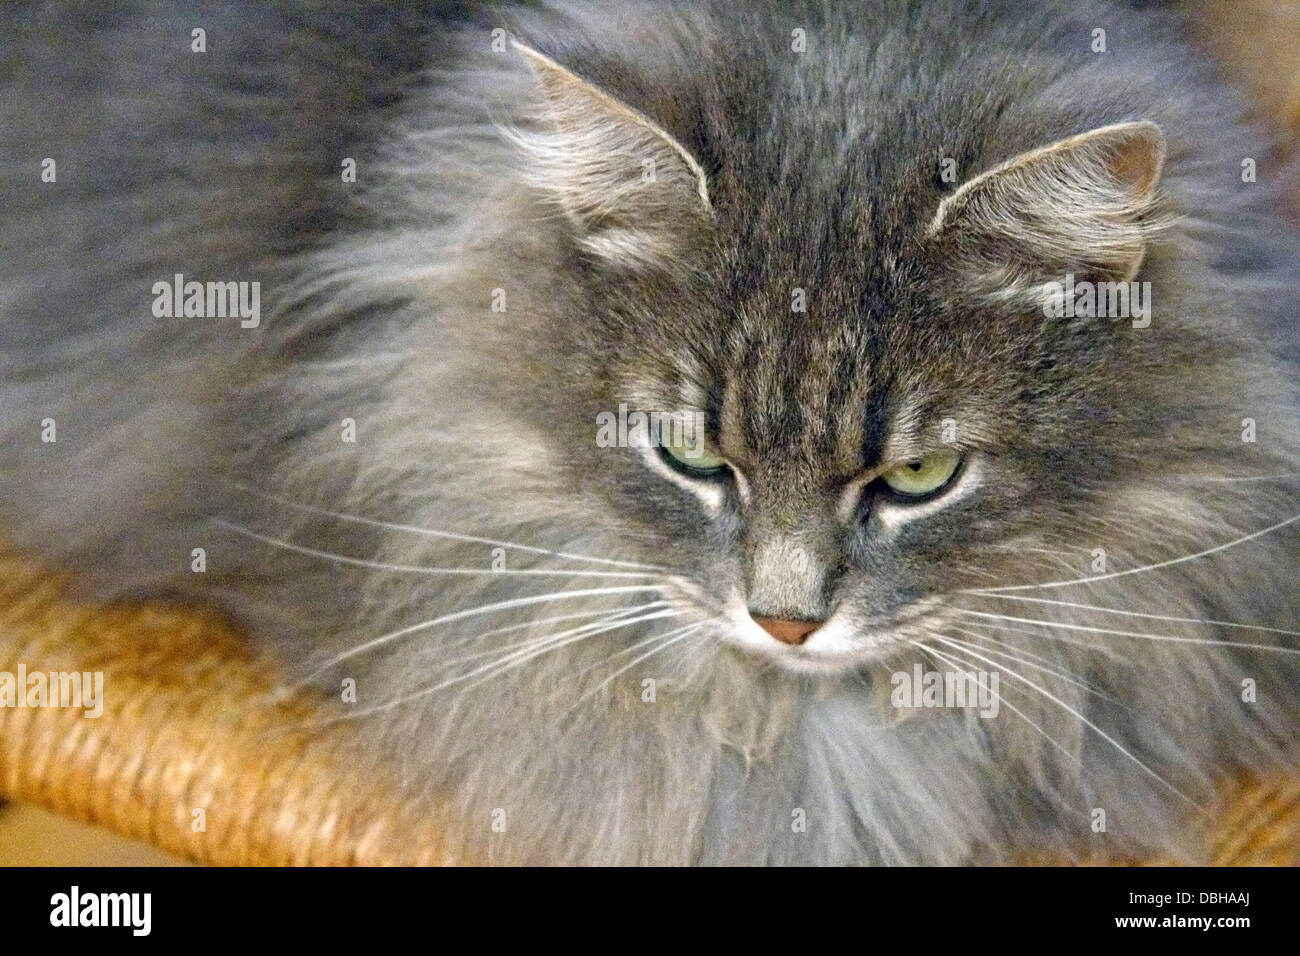 A long haired gray cat looking annoyed and passive aggressive Stock Photo